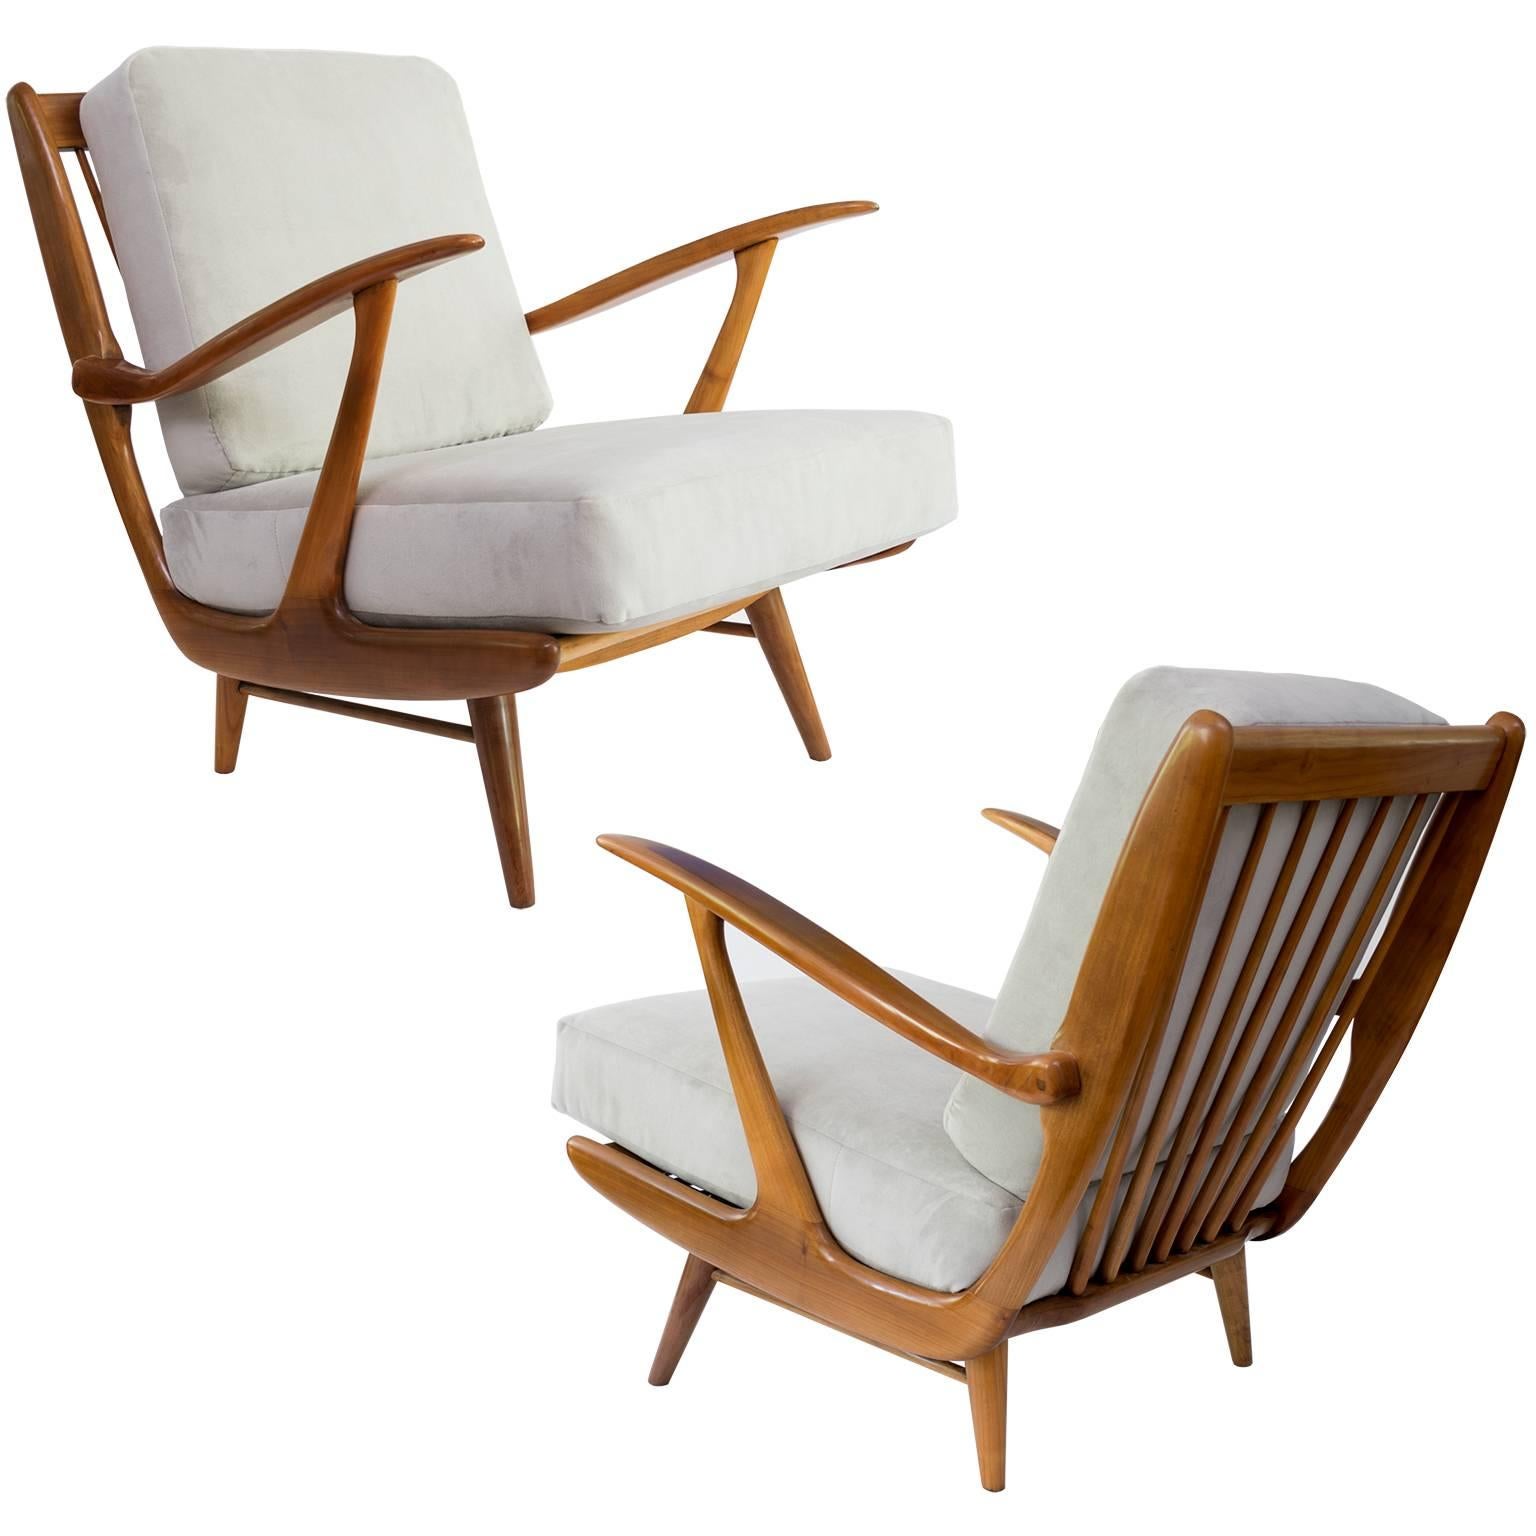 Dutch Mid-century Modern carved armchairs by B. Spuij's, Holland. (a)